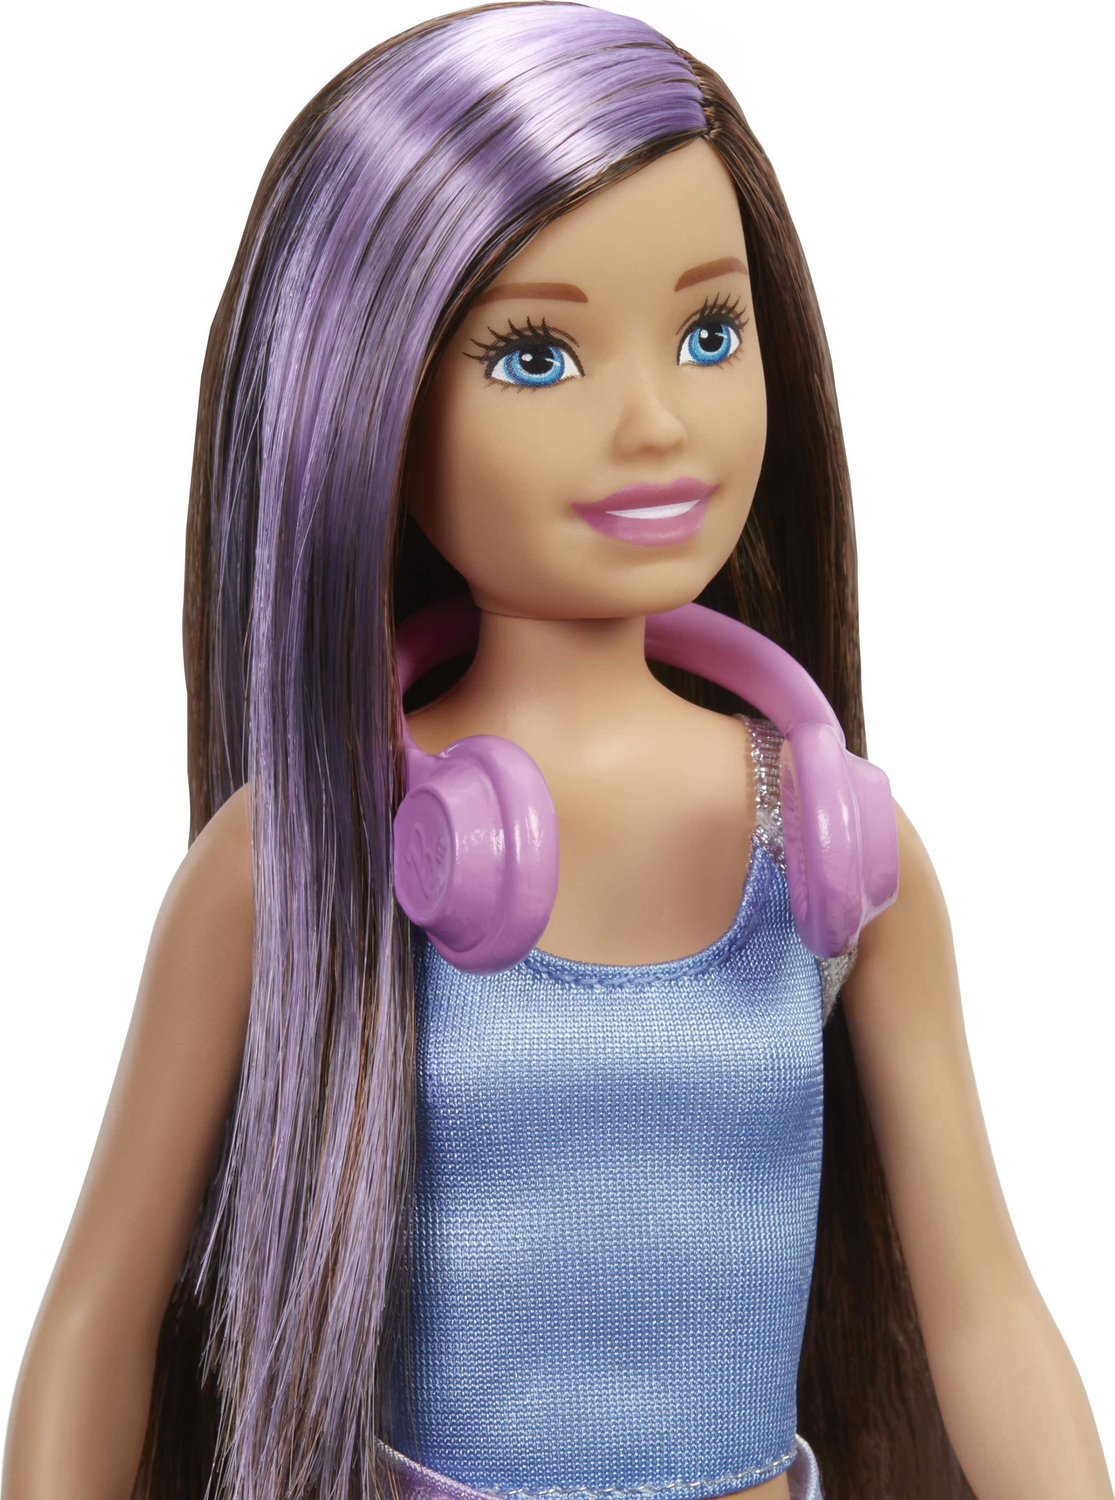 Barbie Mermaid Power Doll And Accessories - Lucky Duck Toys